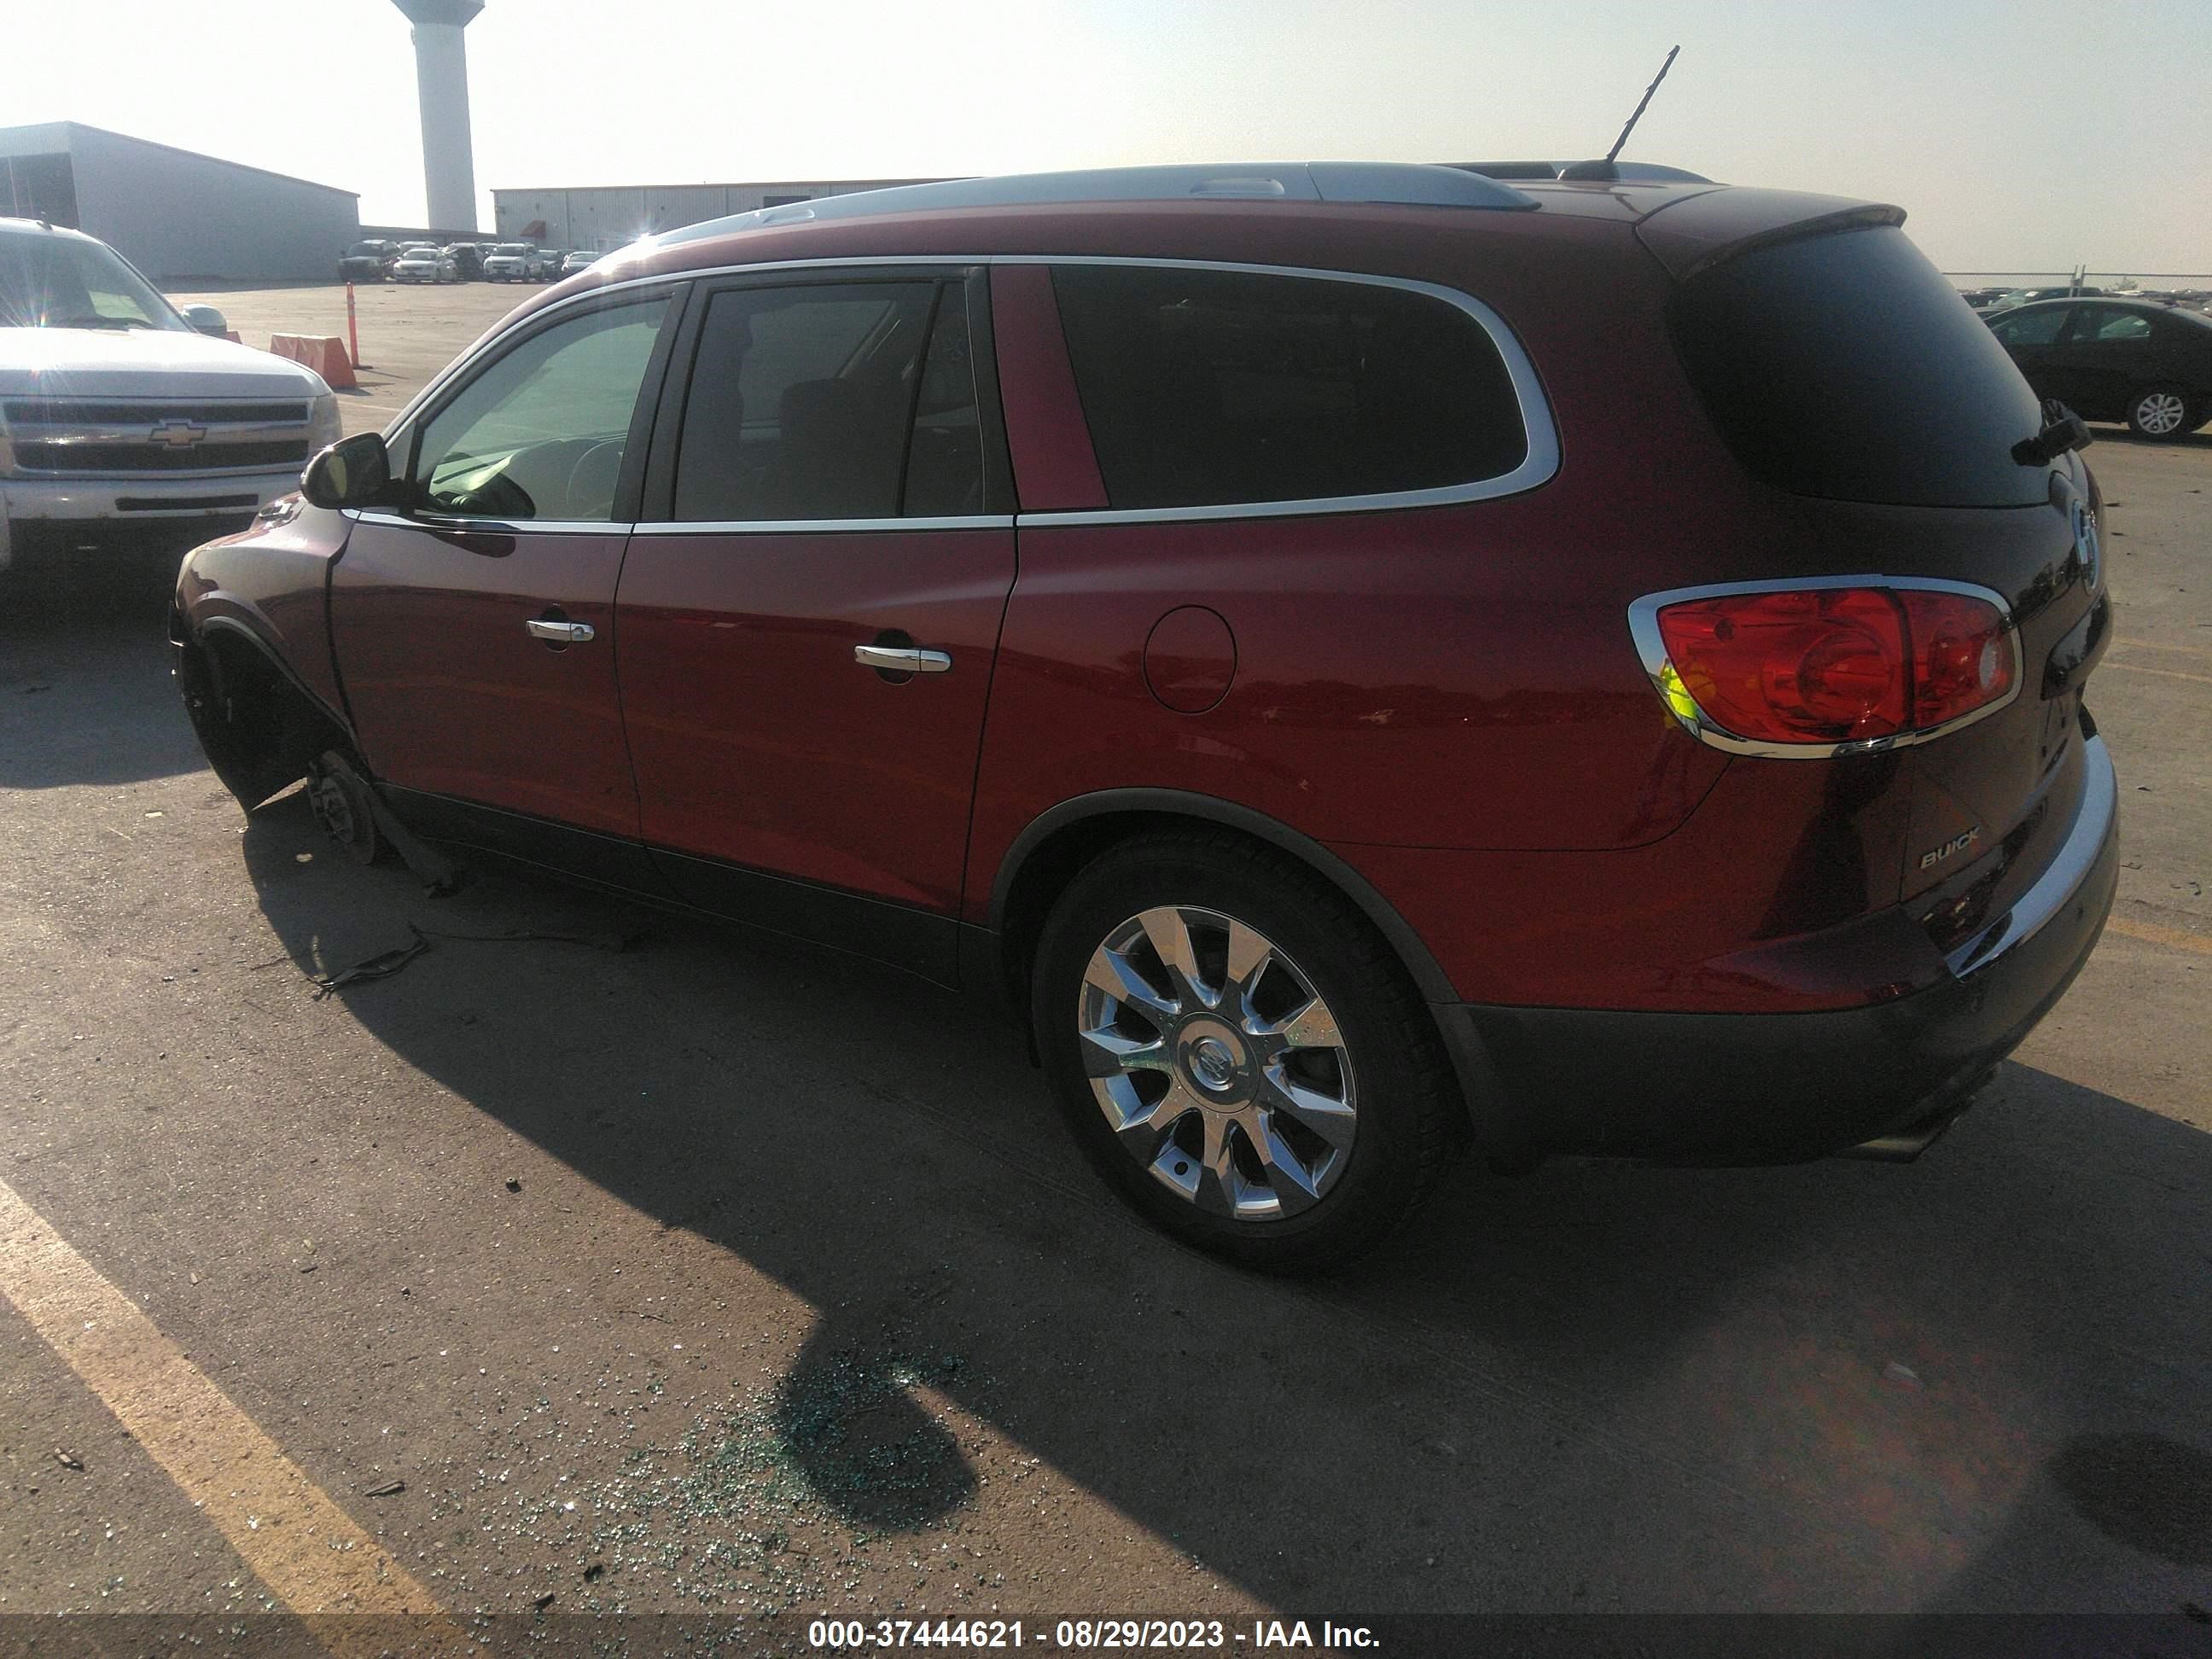 5GAKVCED8BJ335898  - BUICK ENCLAVE  2011 IMG - 2